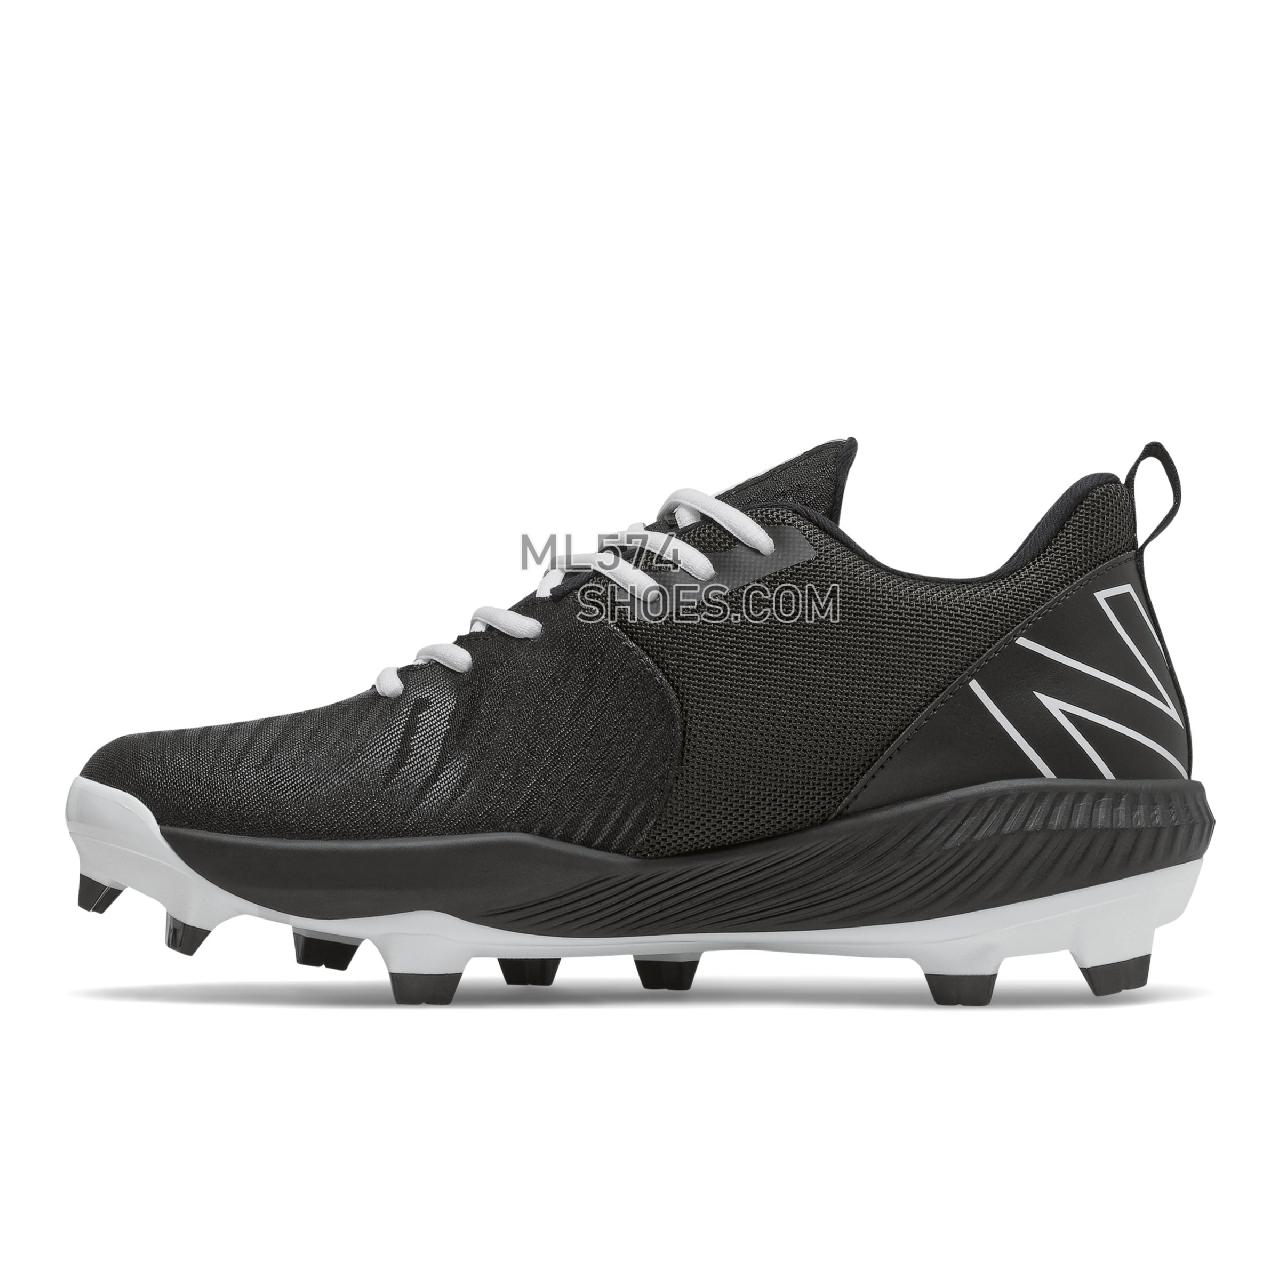 New Balance FuelCell 4040 v6 Molded - Men's Mid-Cut Baseball Cleats - Black with White - PL4040K6